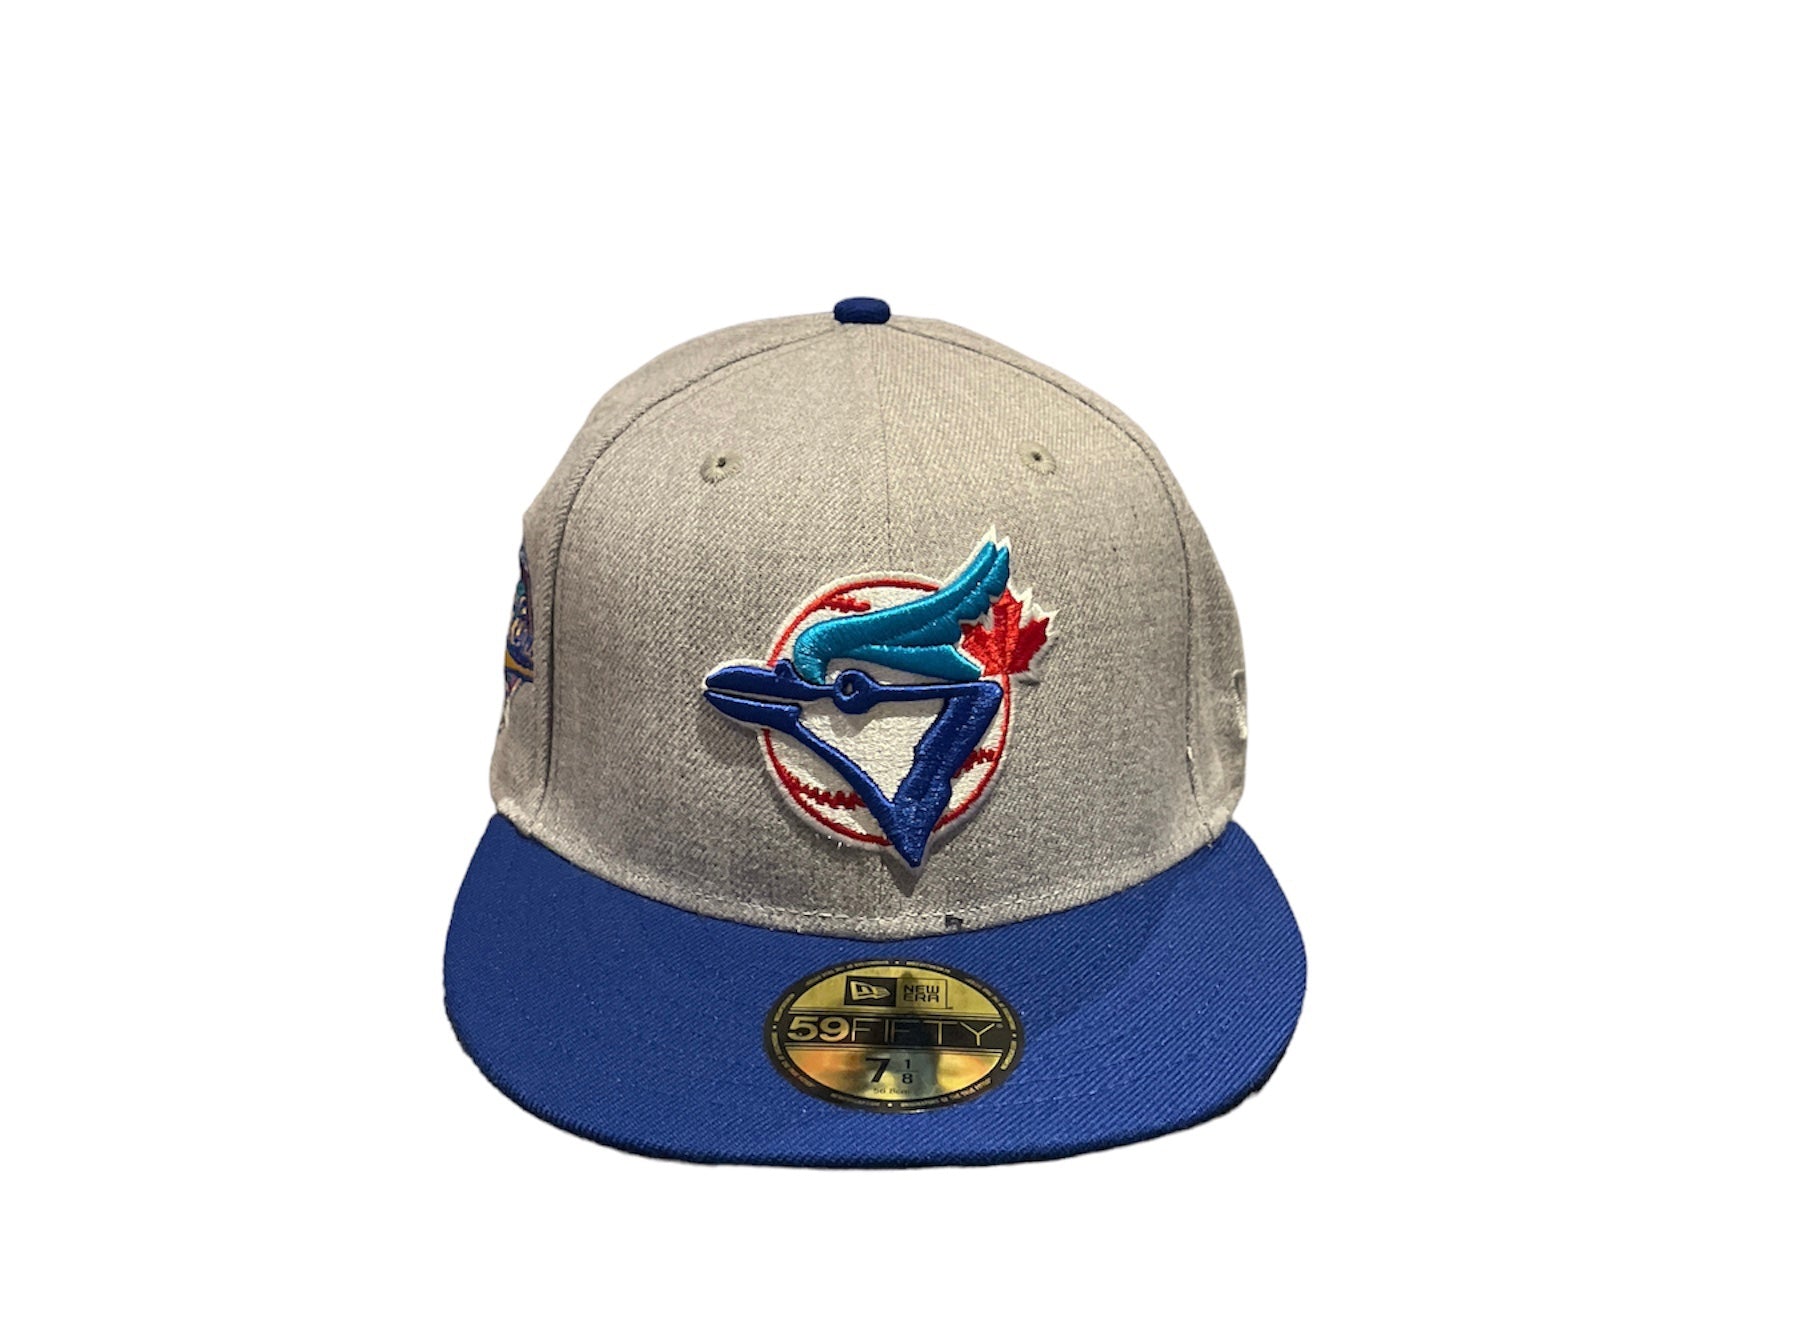 Toronto Blue Jays 1993 World Series Authentic Cooperstown